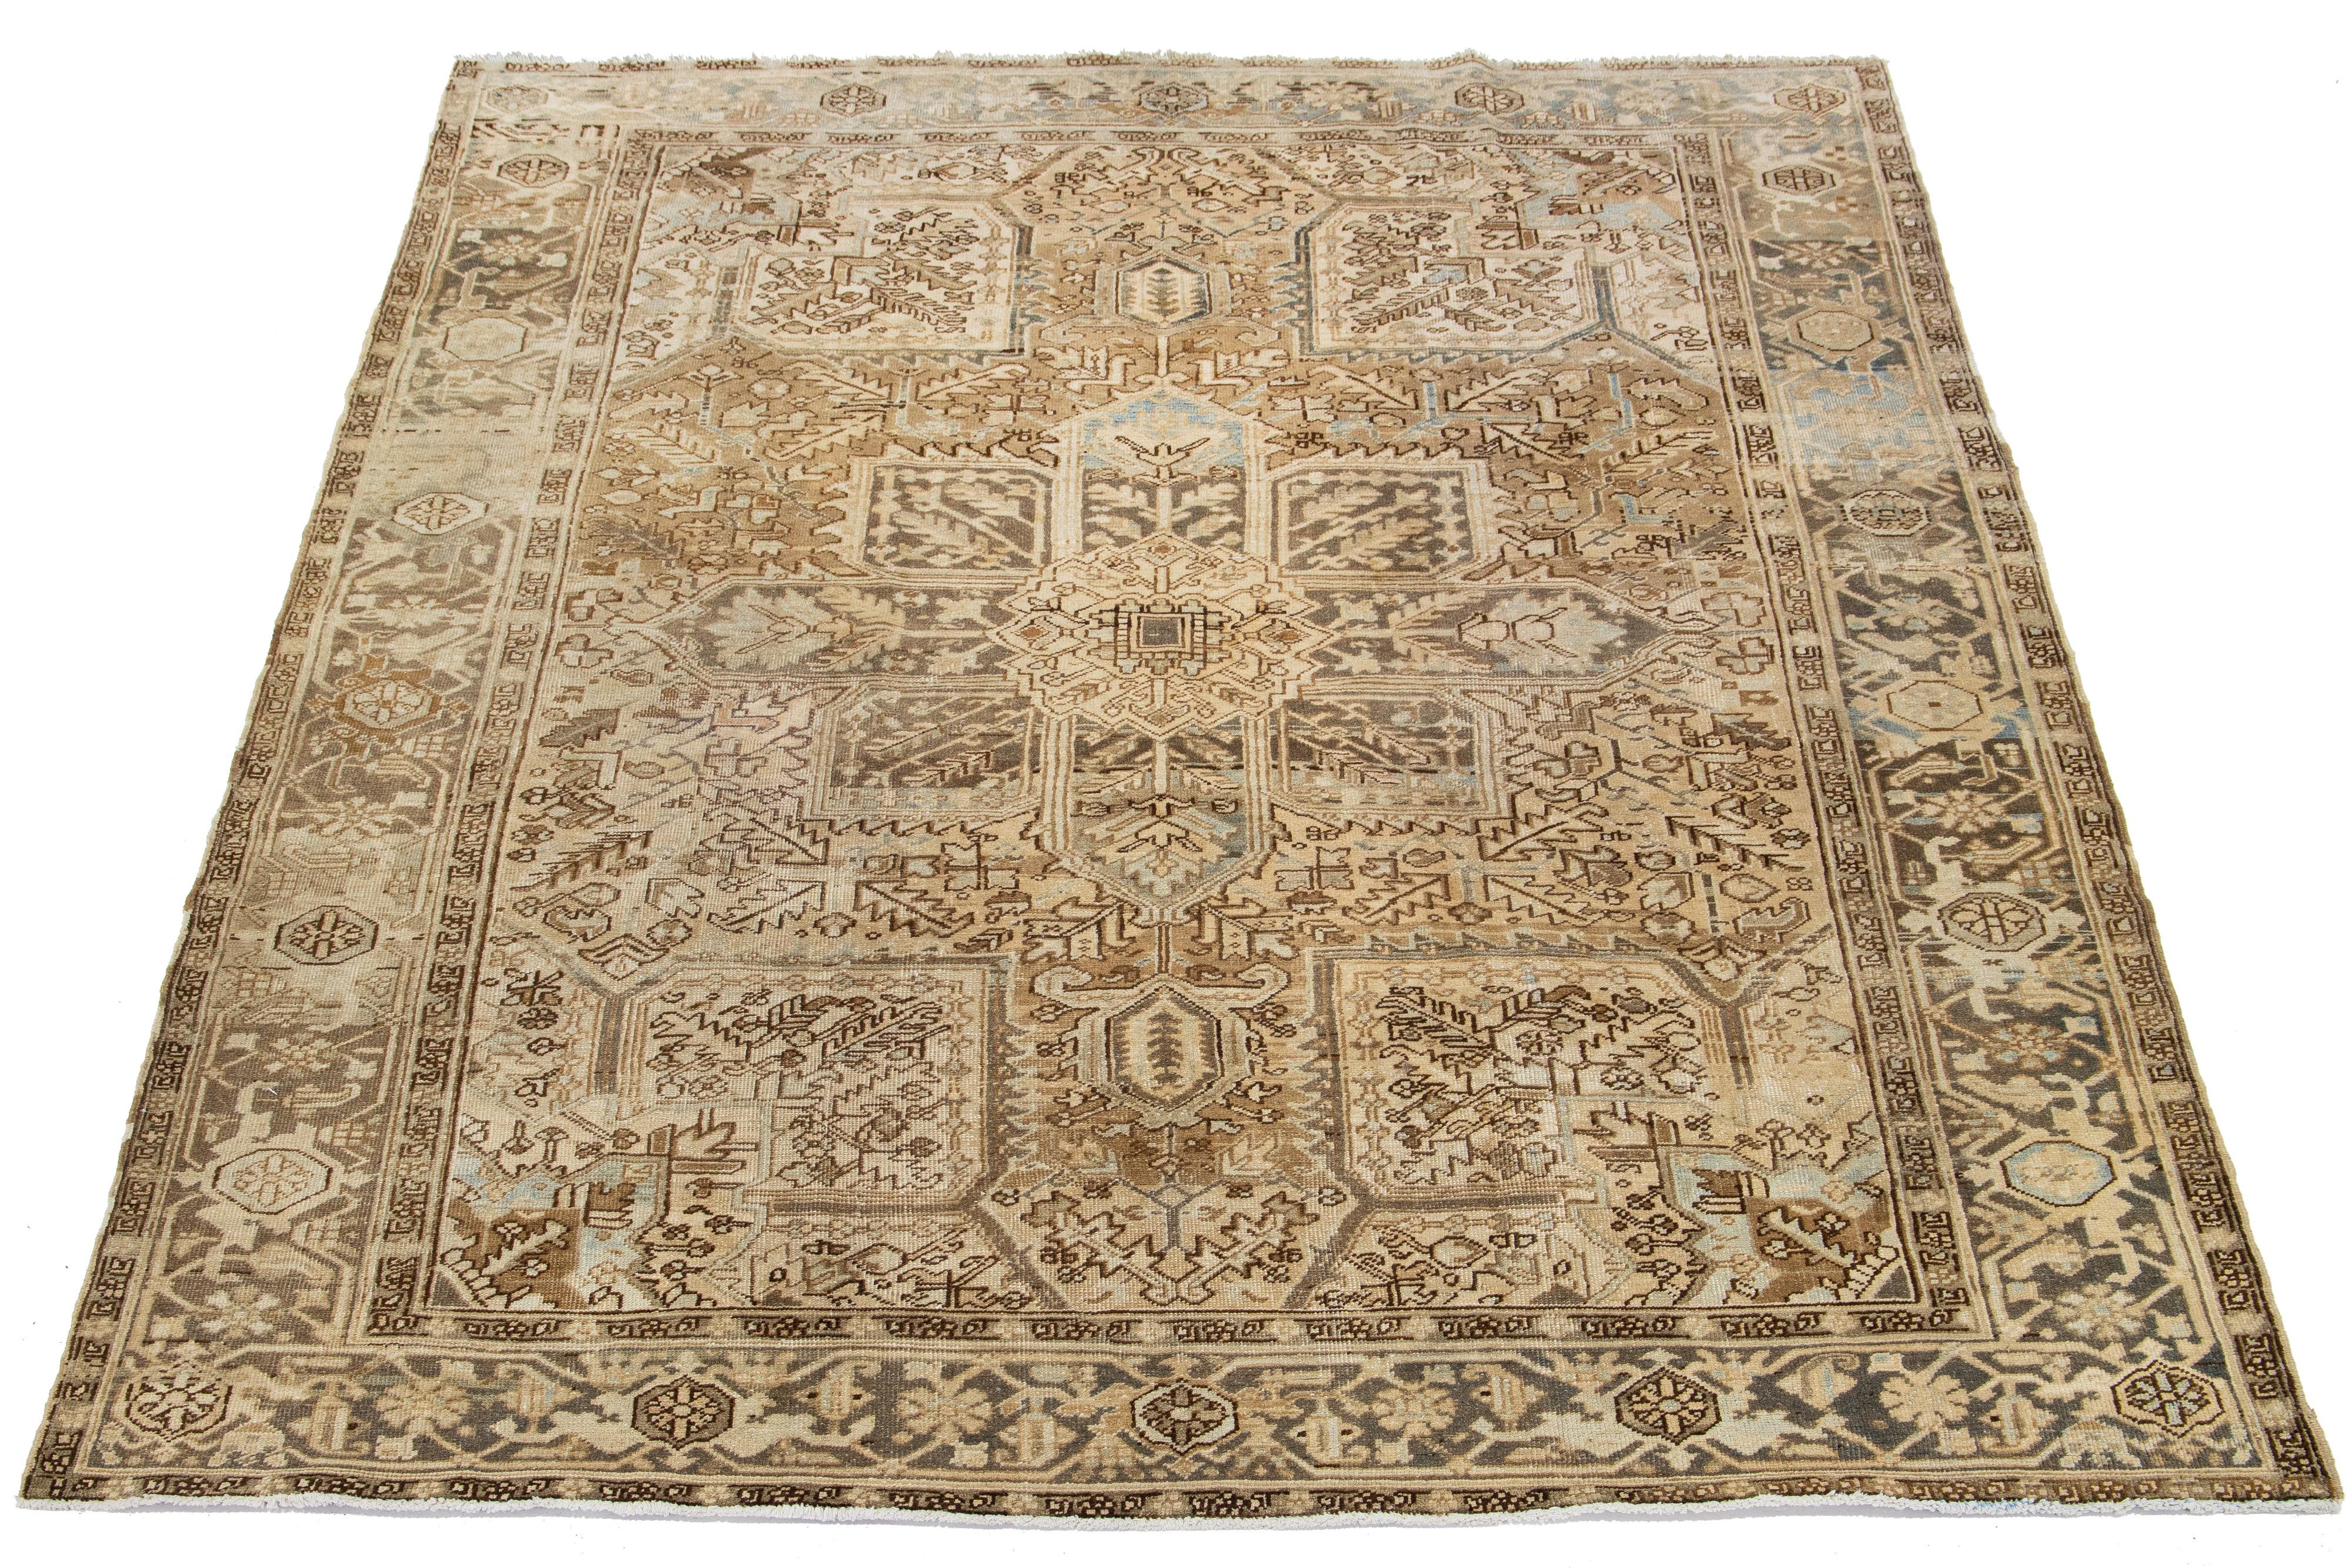 This antique Persian Heriz rug is made with hand-knotted wool. The light brown field showcases a captivating allover pattern adorned with blue, gray, and beige shades.

This rug measures 8'5' x 10'3